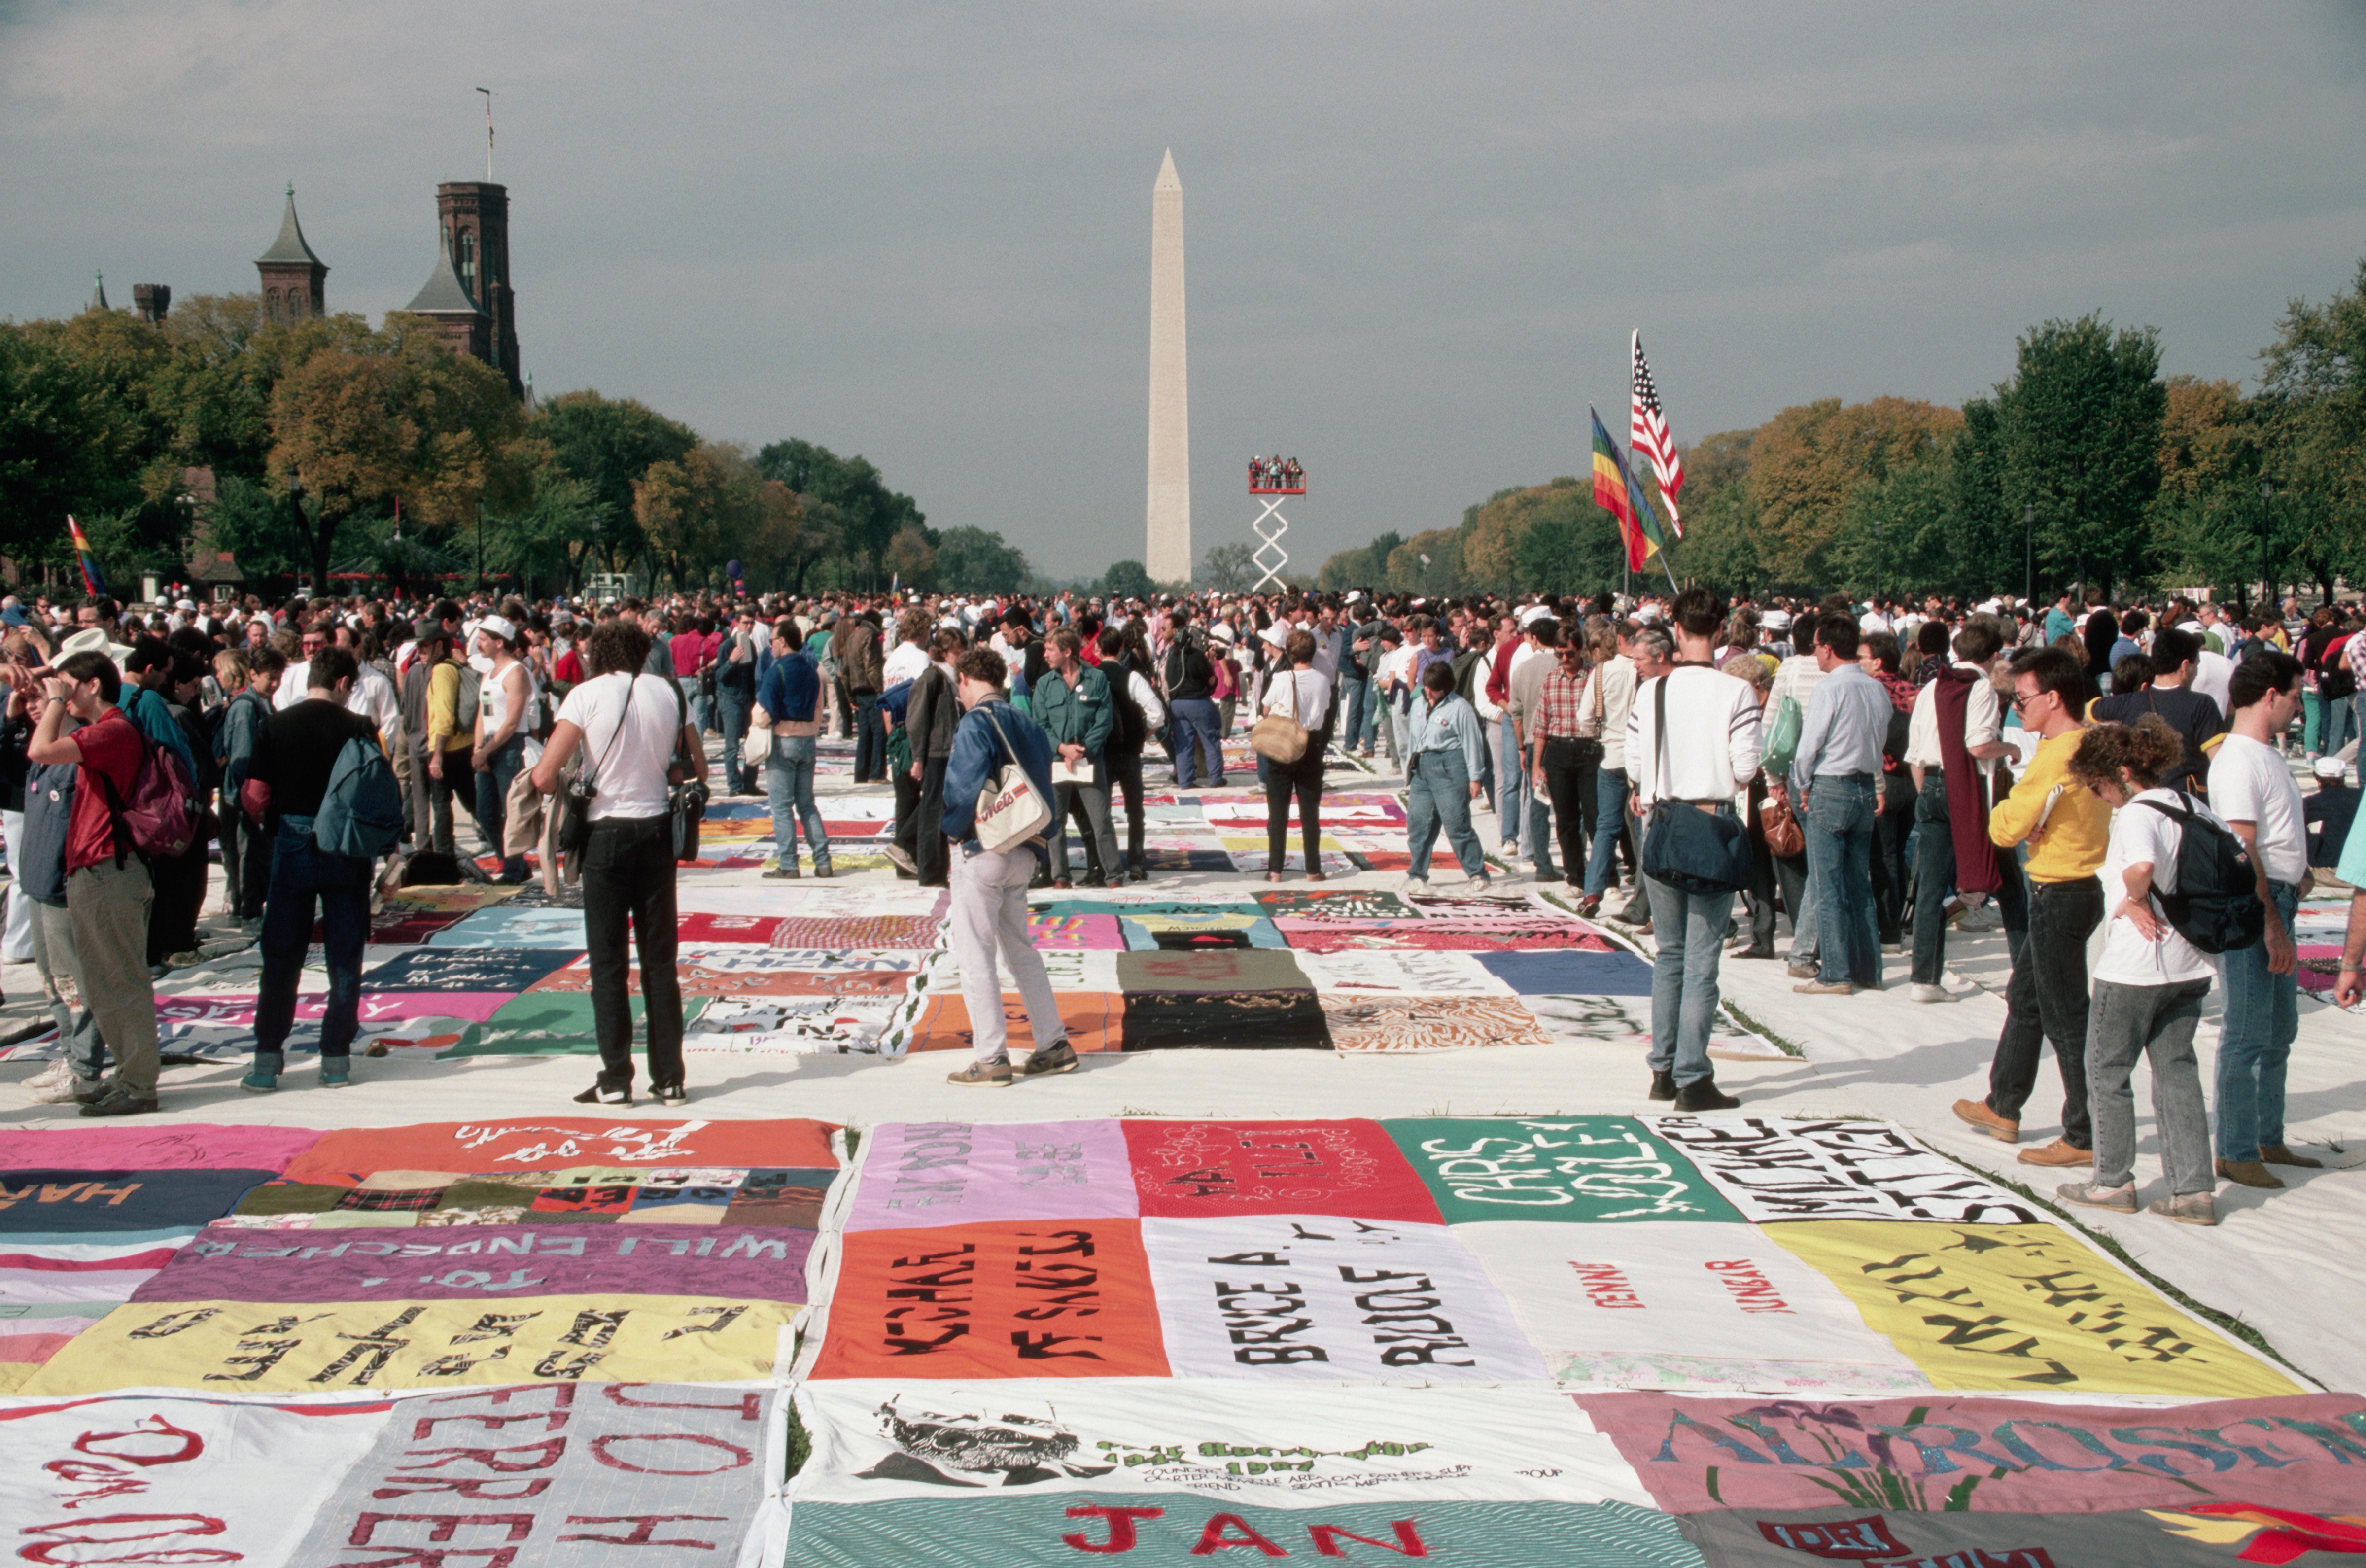 The AIDS Memorial Quilt is shown for the first time on the Mall in Washington DC, circa October 1987. (Lee Snider/Photo Images/Corbis—Getty Images)